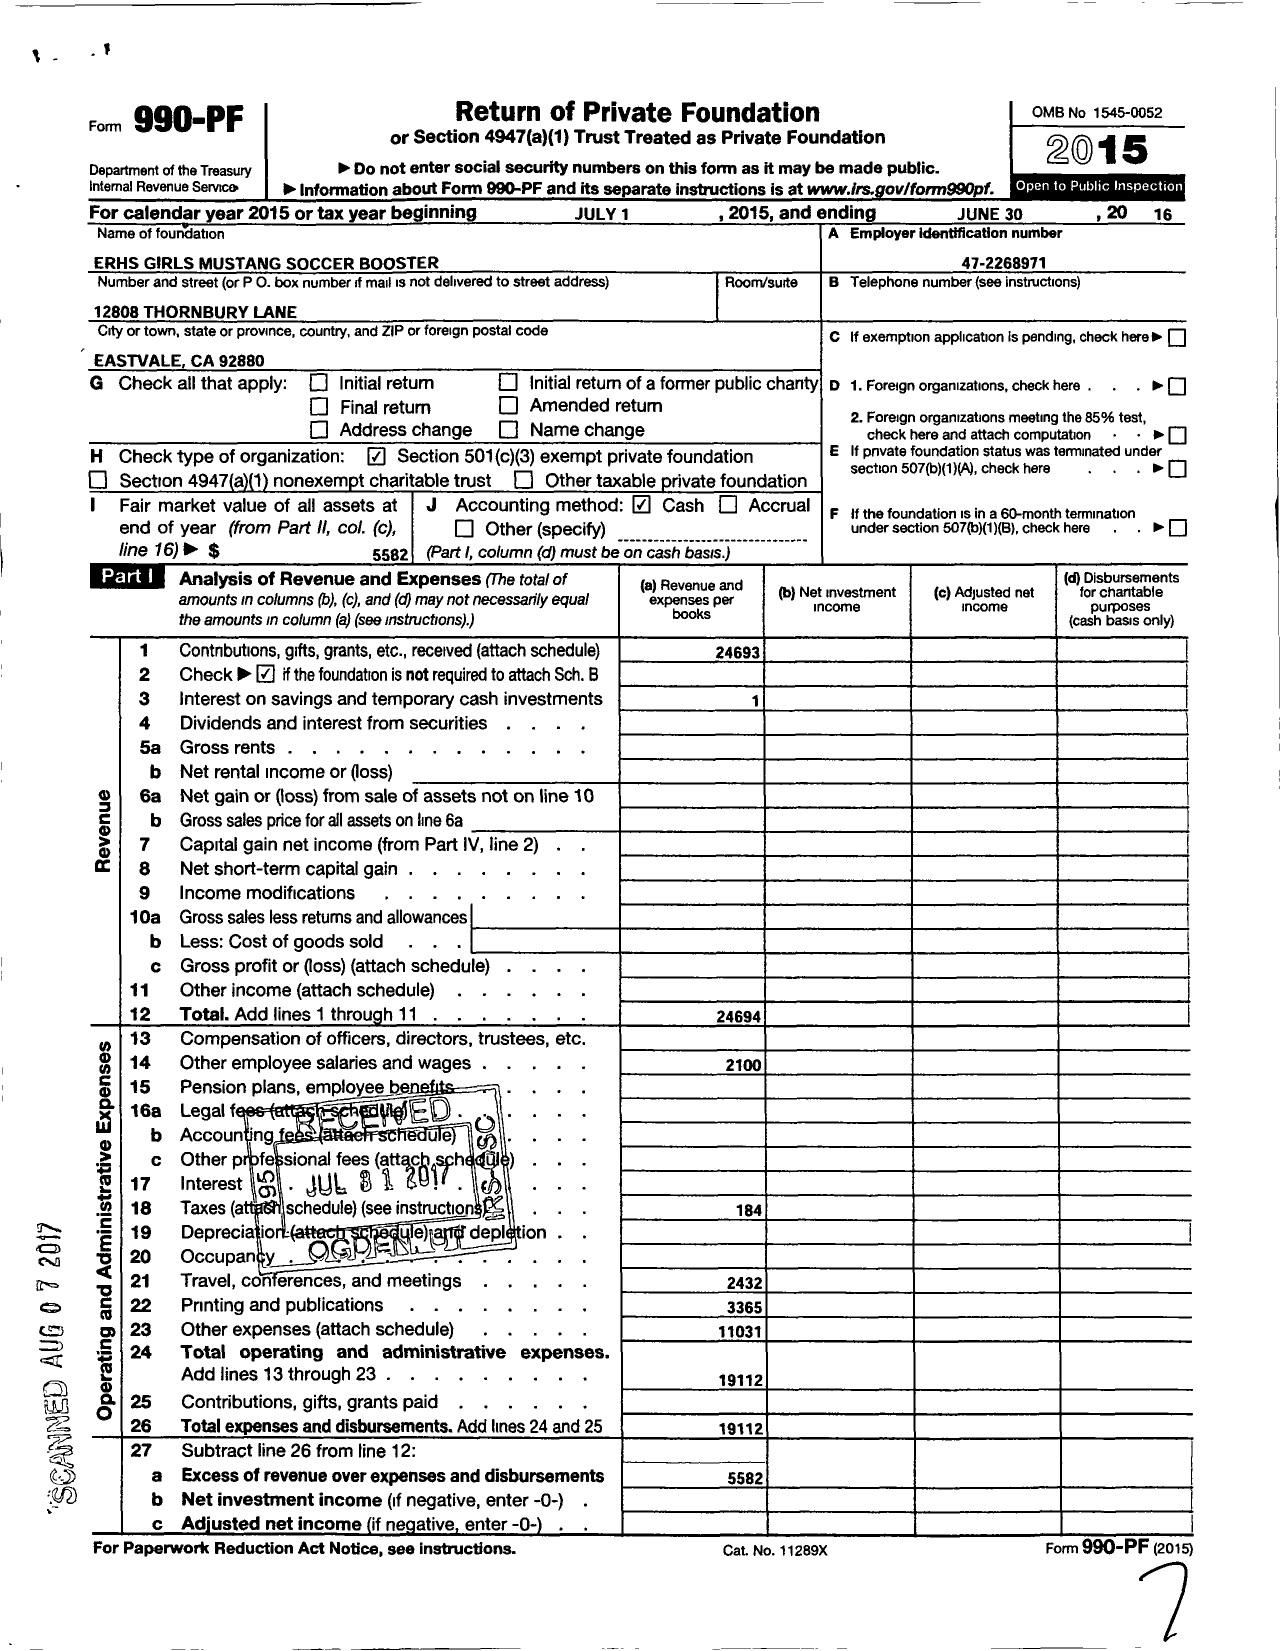 Image of first page of 2015 Form 990PF for Erhs Girls Mustang Soccer Booster